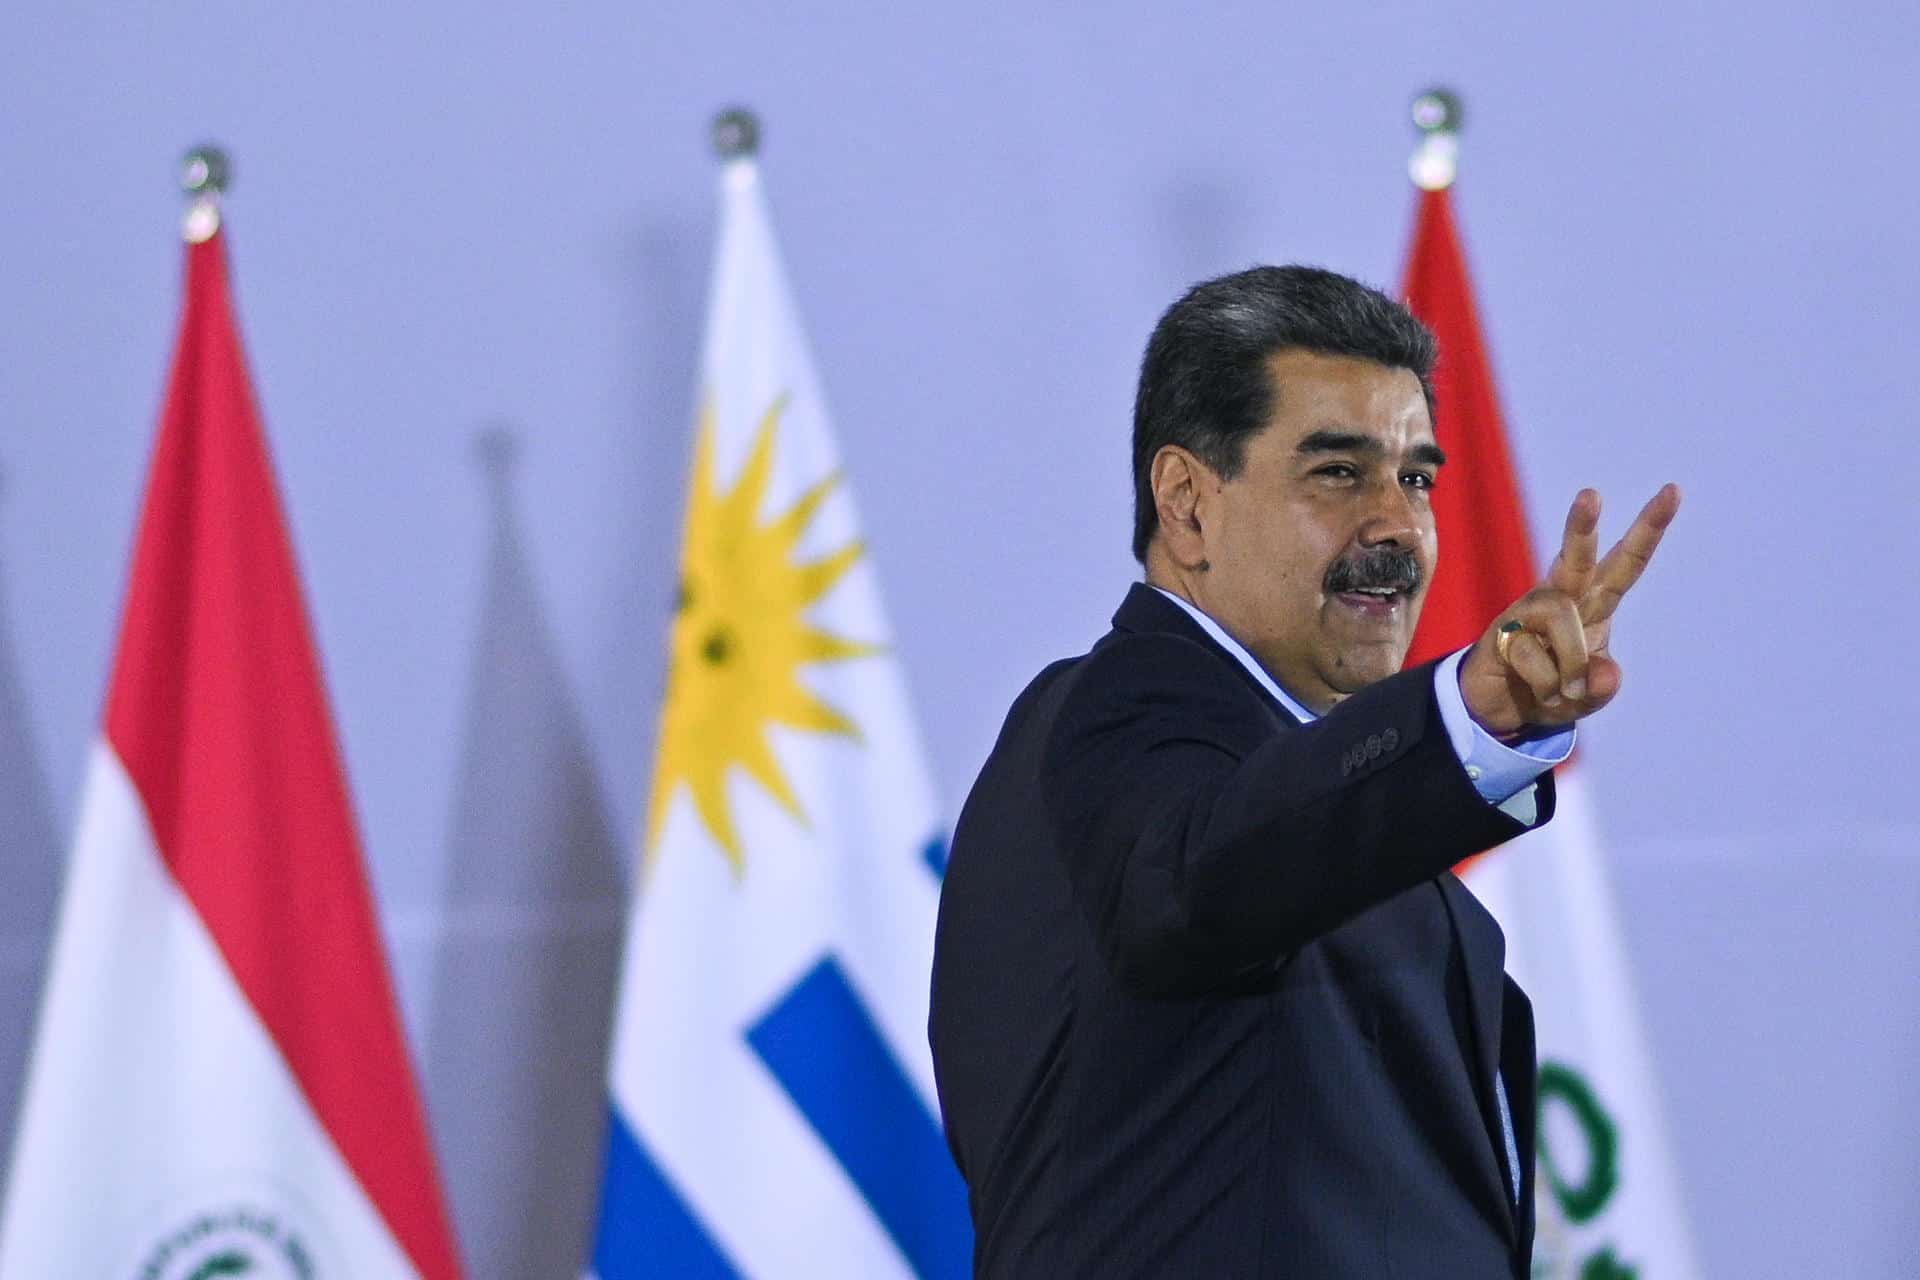 Venezuelan President Nicolás Maduro making the victory sign during the South American Summit of Presidents in Brazil on Tuesday, May 30, 2023. Photo: André Borges/EFE.